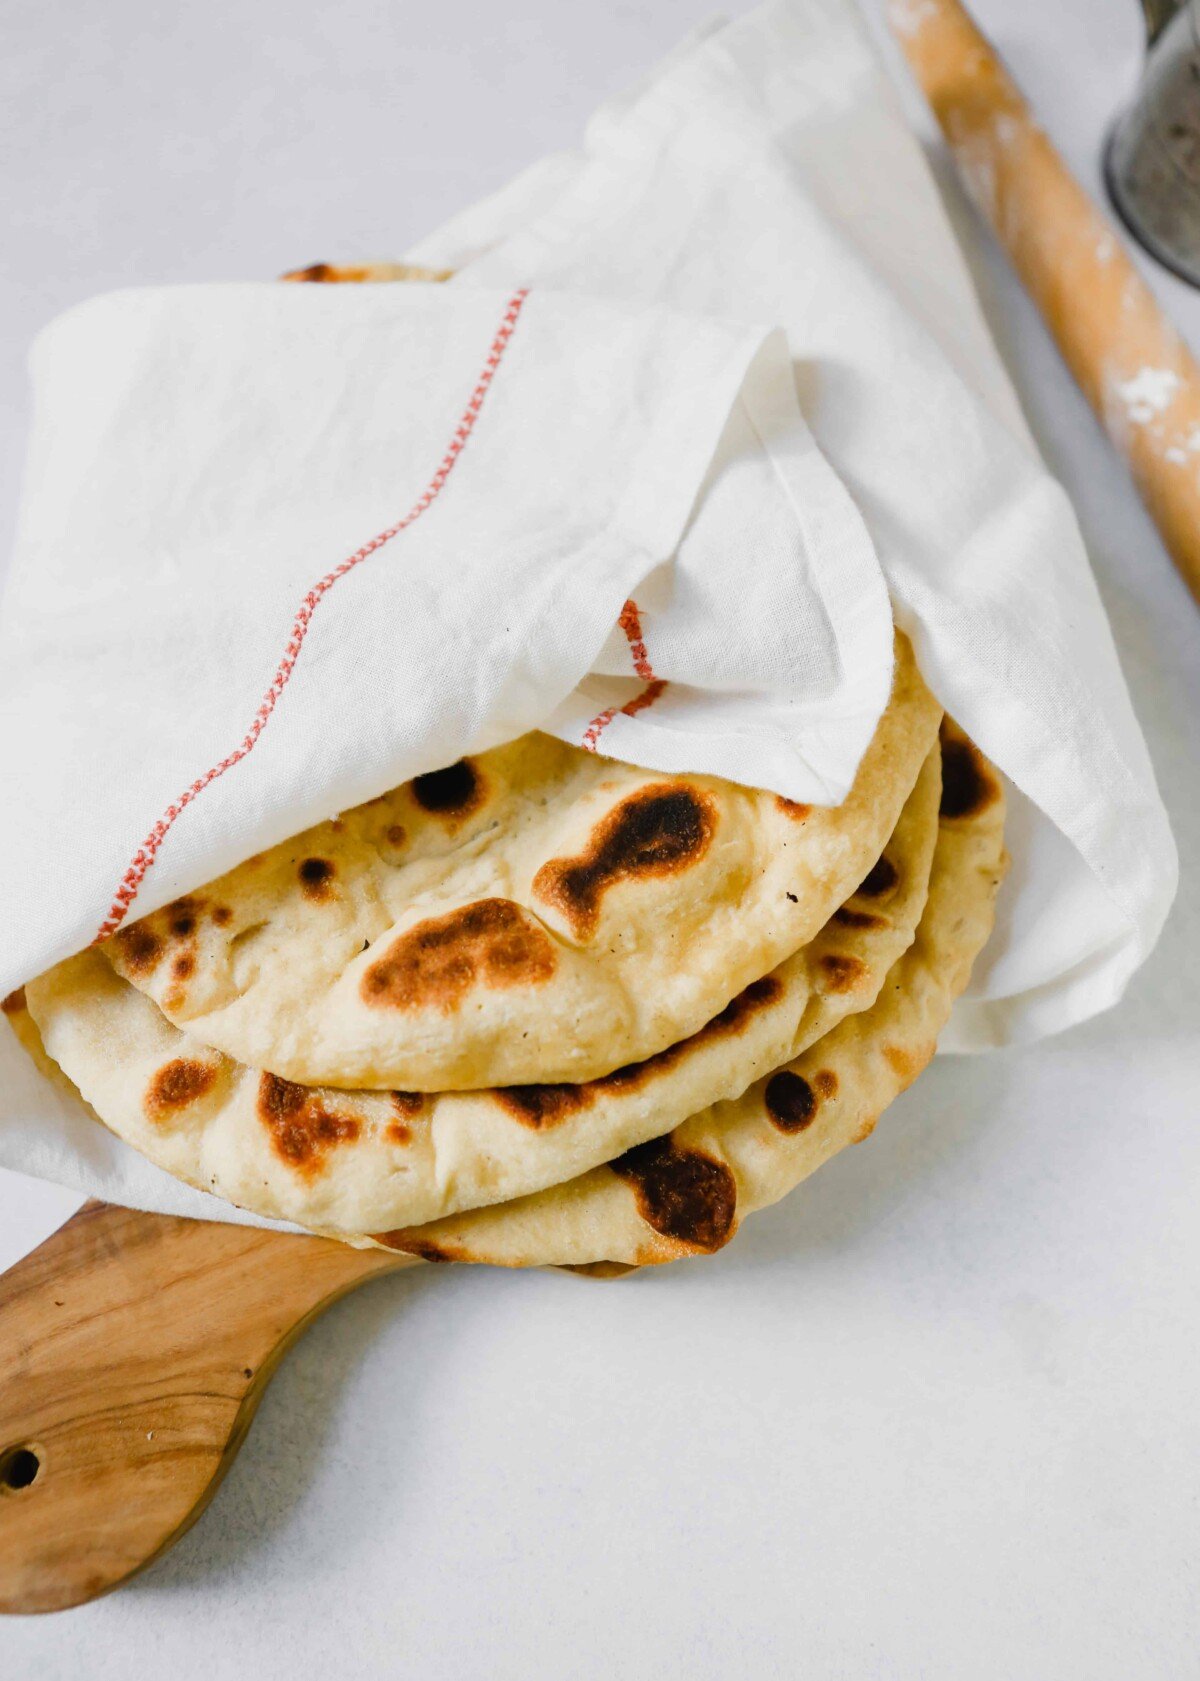 Homemade naan bread wrapped in a white towel